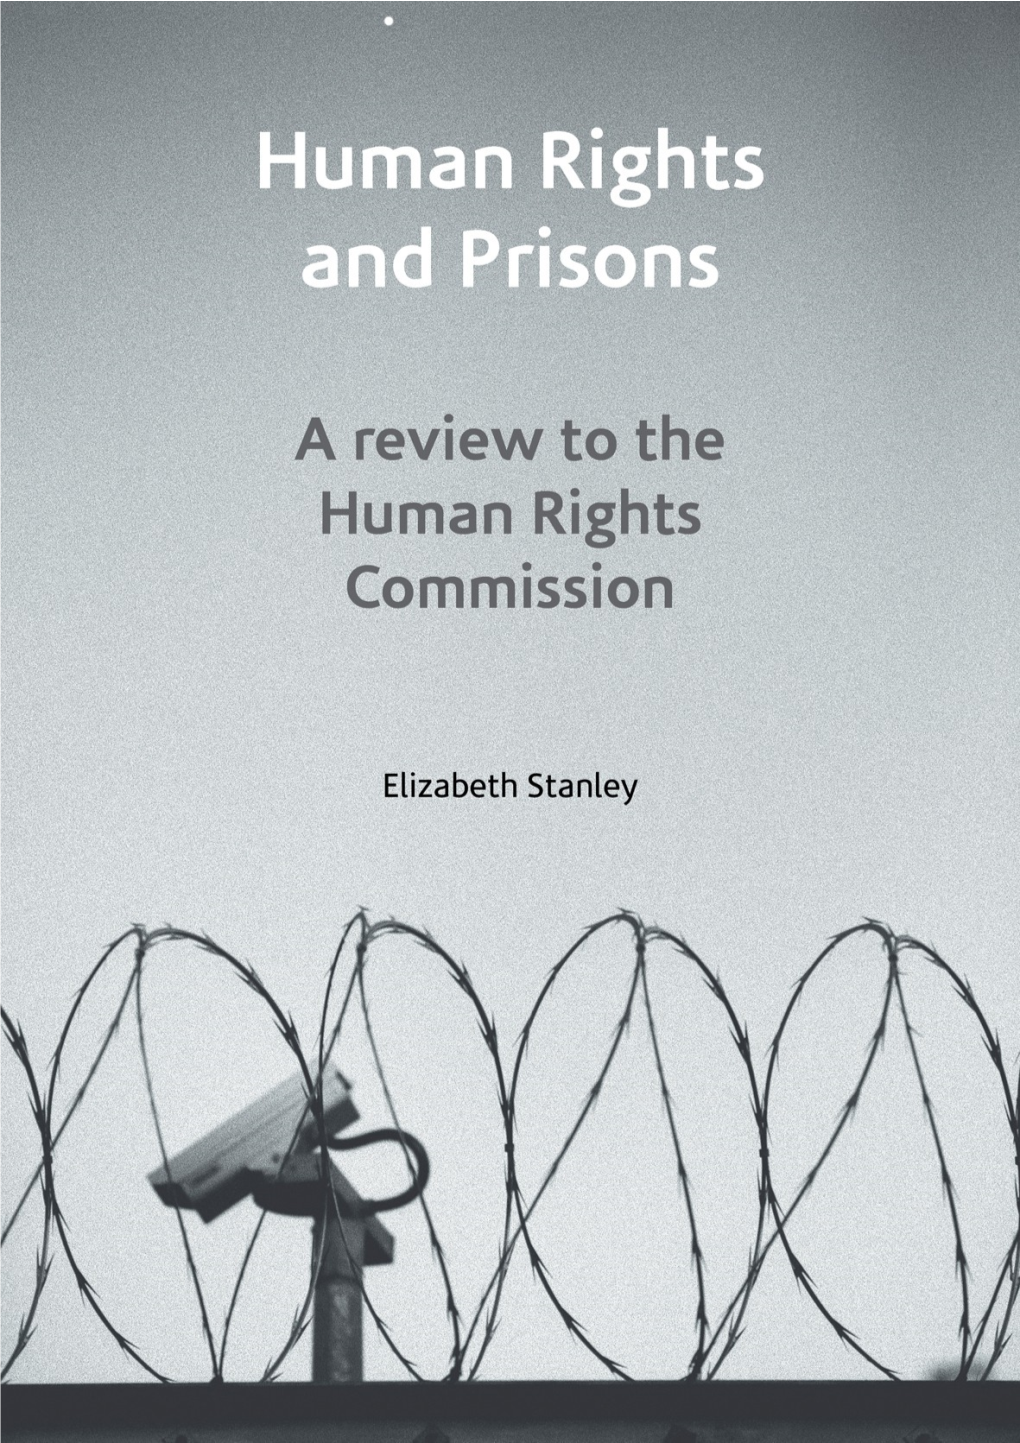 Human Rights and Prisons